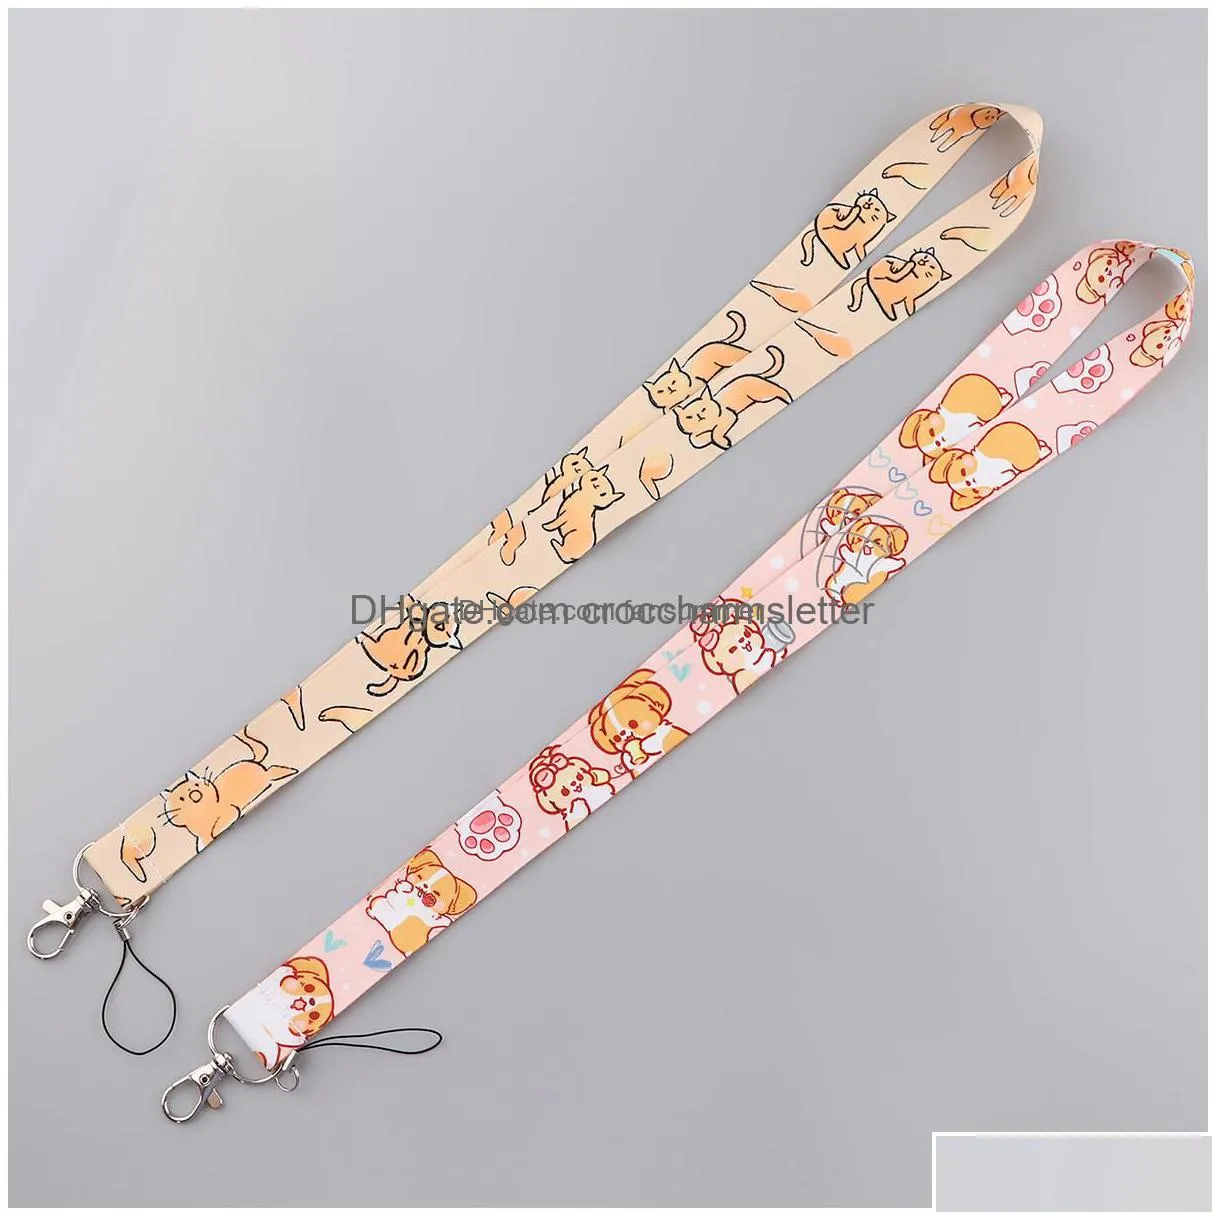 shoe parts accessories cat and dog vintage sun moon lanyards for key neck strap card badge gym keychain lanyard holder diy hanging r